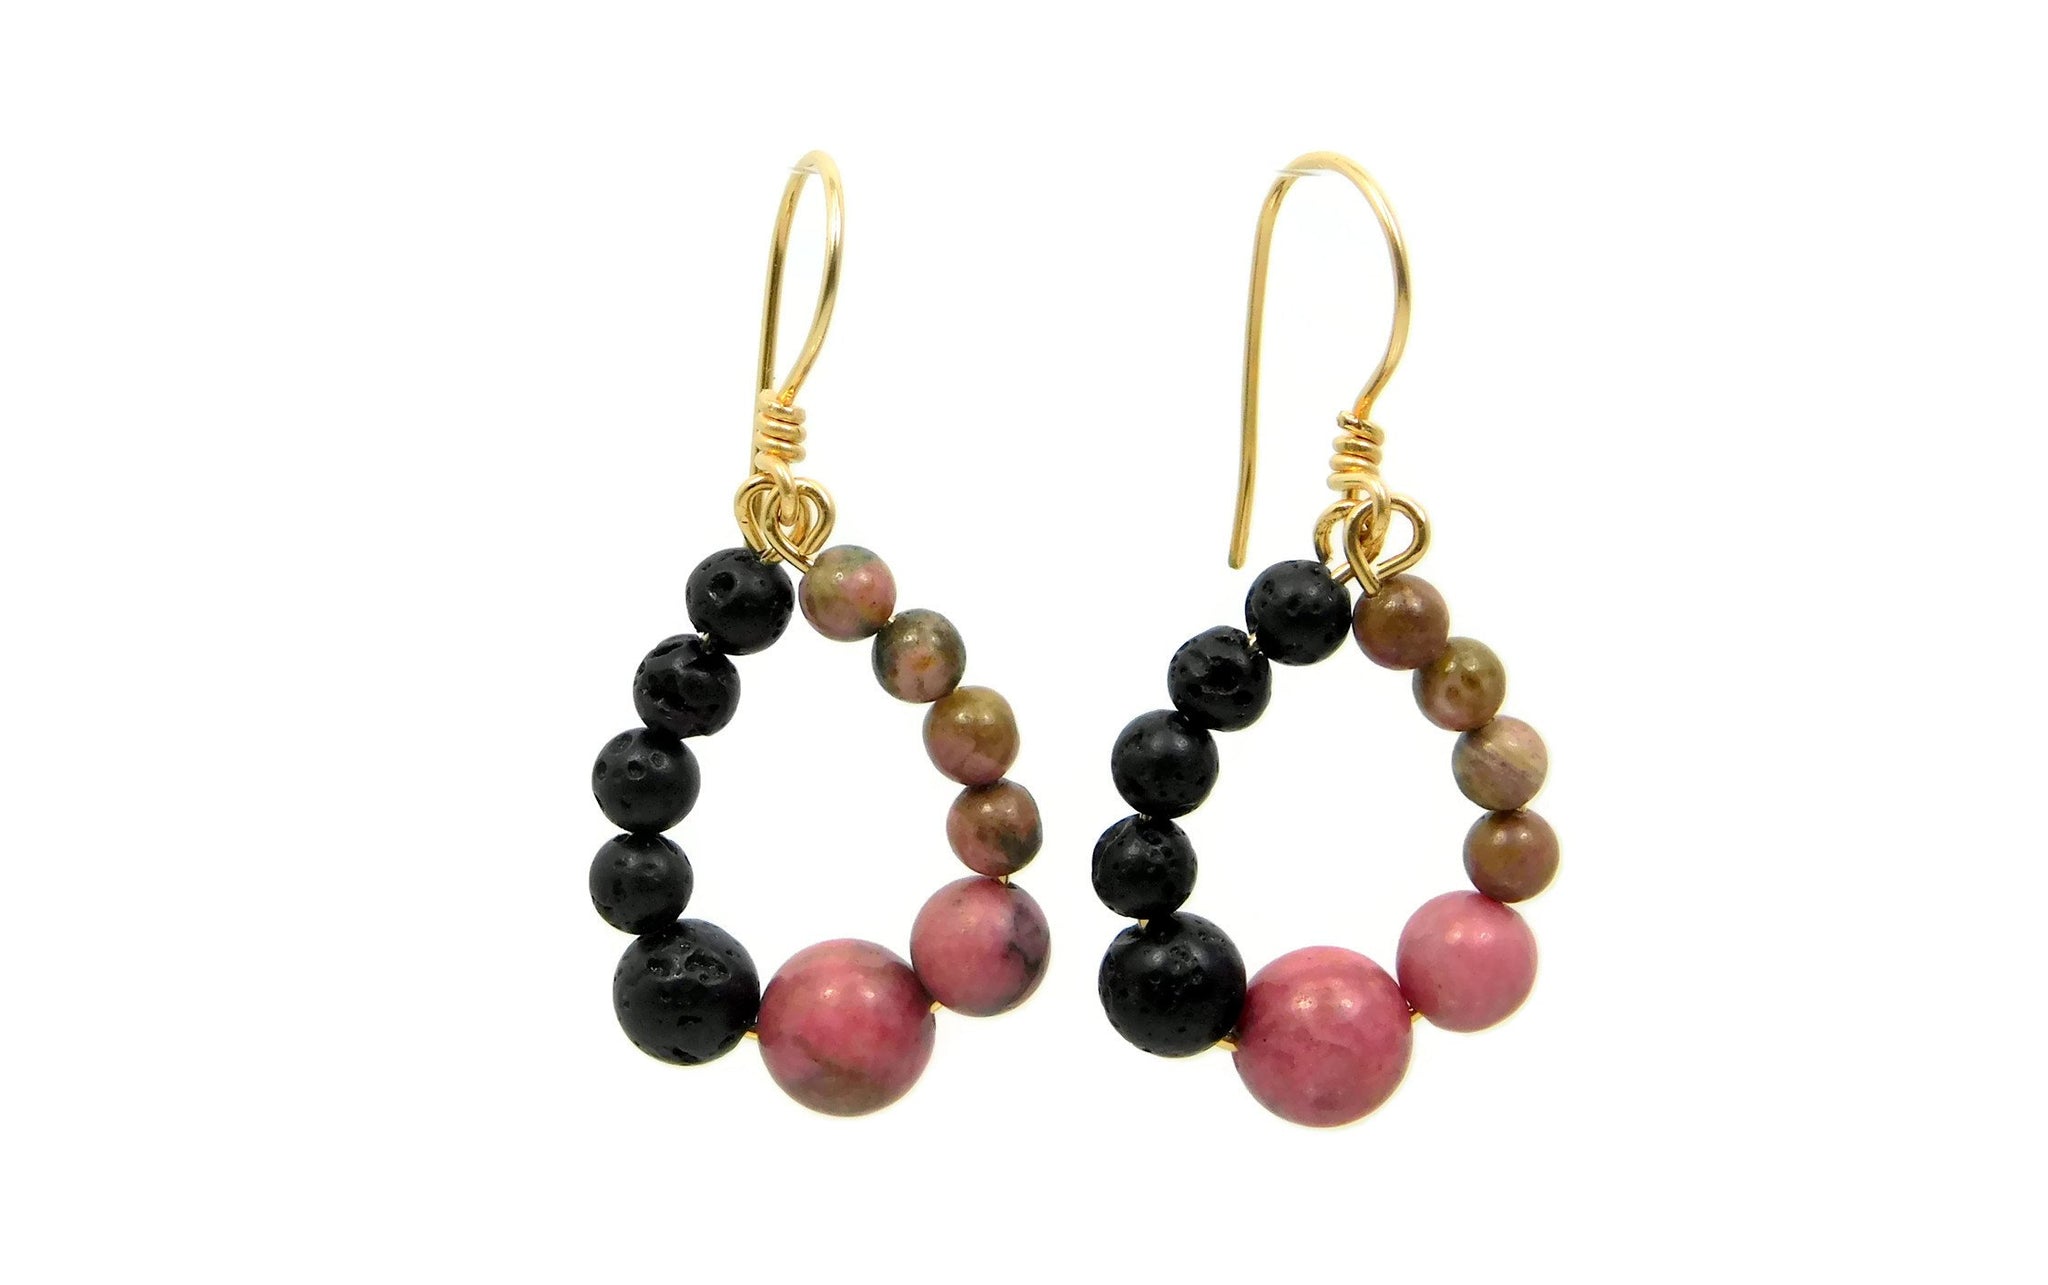 Rhodonite and Lava Stone earrings in sterling silver and 14kt gold fill cold fusion jewelry gold and silver jewelry handmade silver jewelry sterling silver jewelry artisan jewelry handmade gemstone jewelry one of a kind jewelry unique jewelry